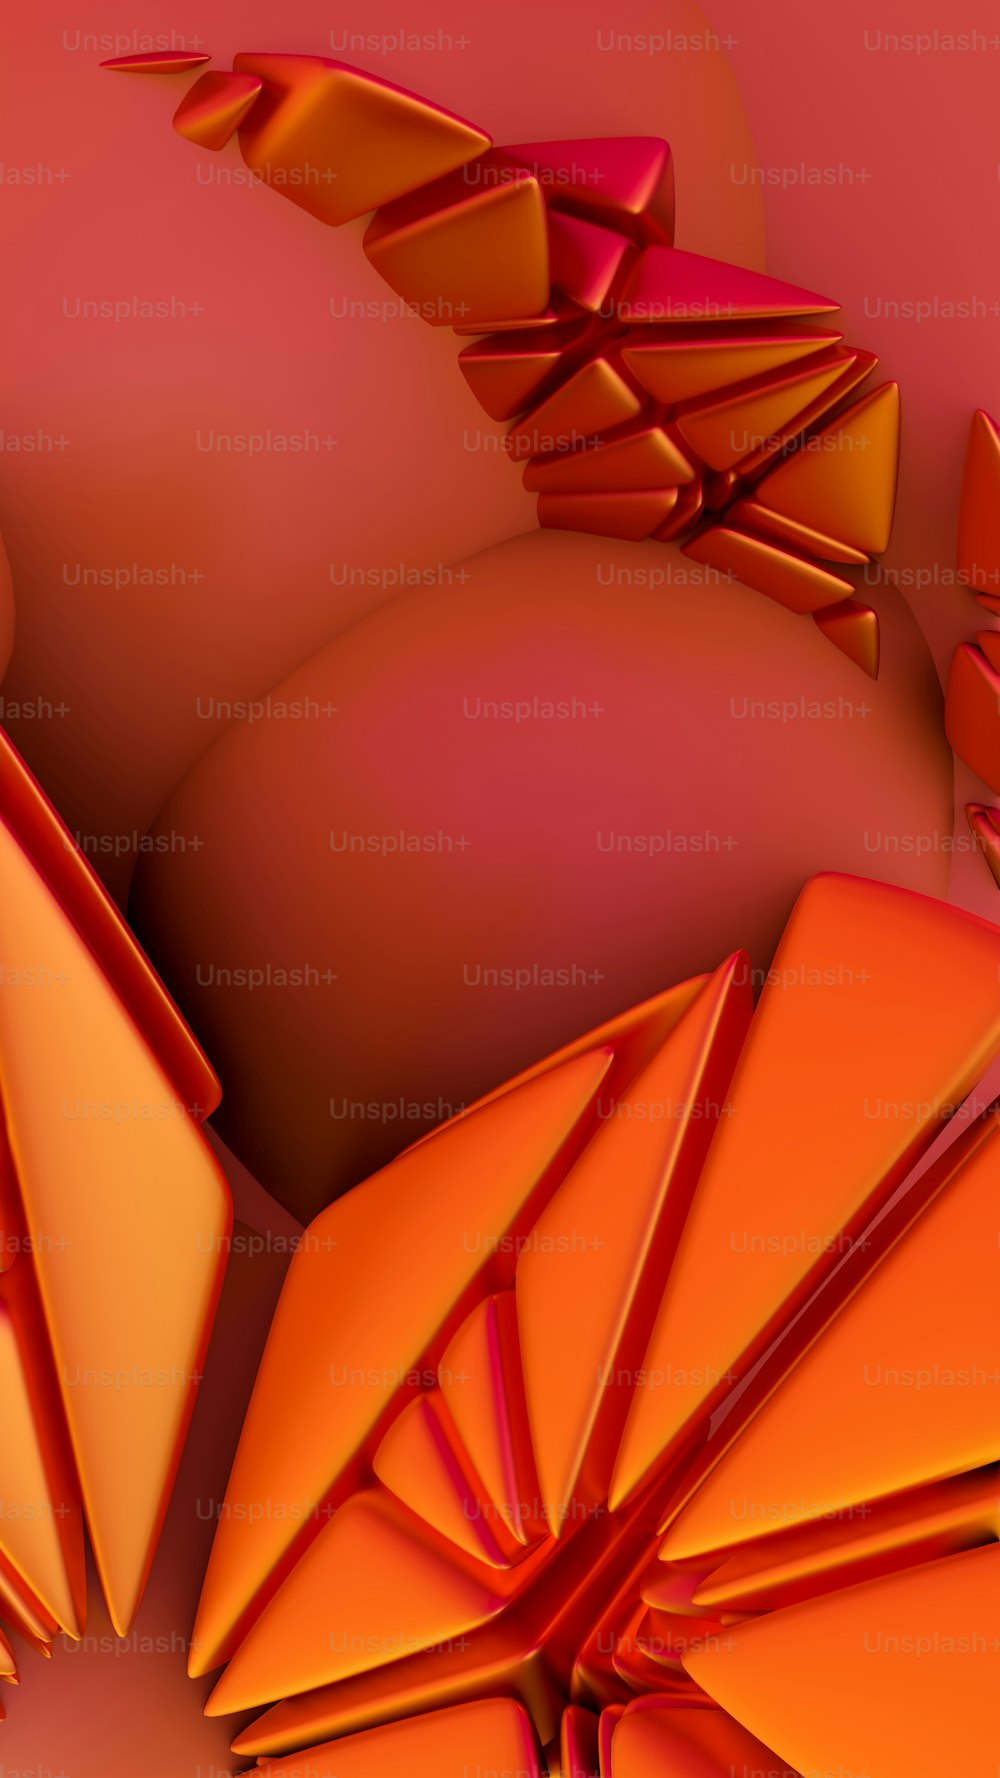 an abstract image of orange and pink shapes